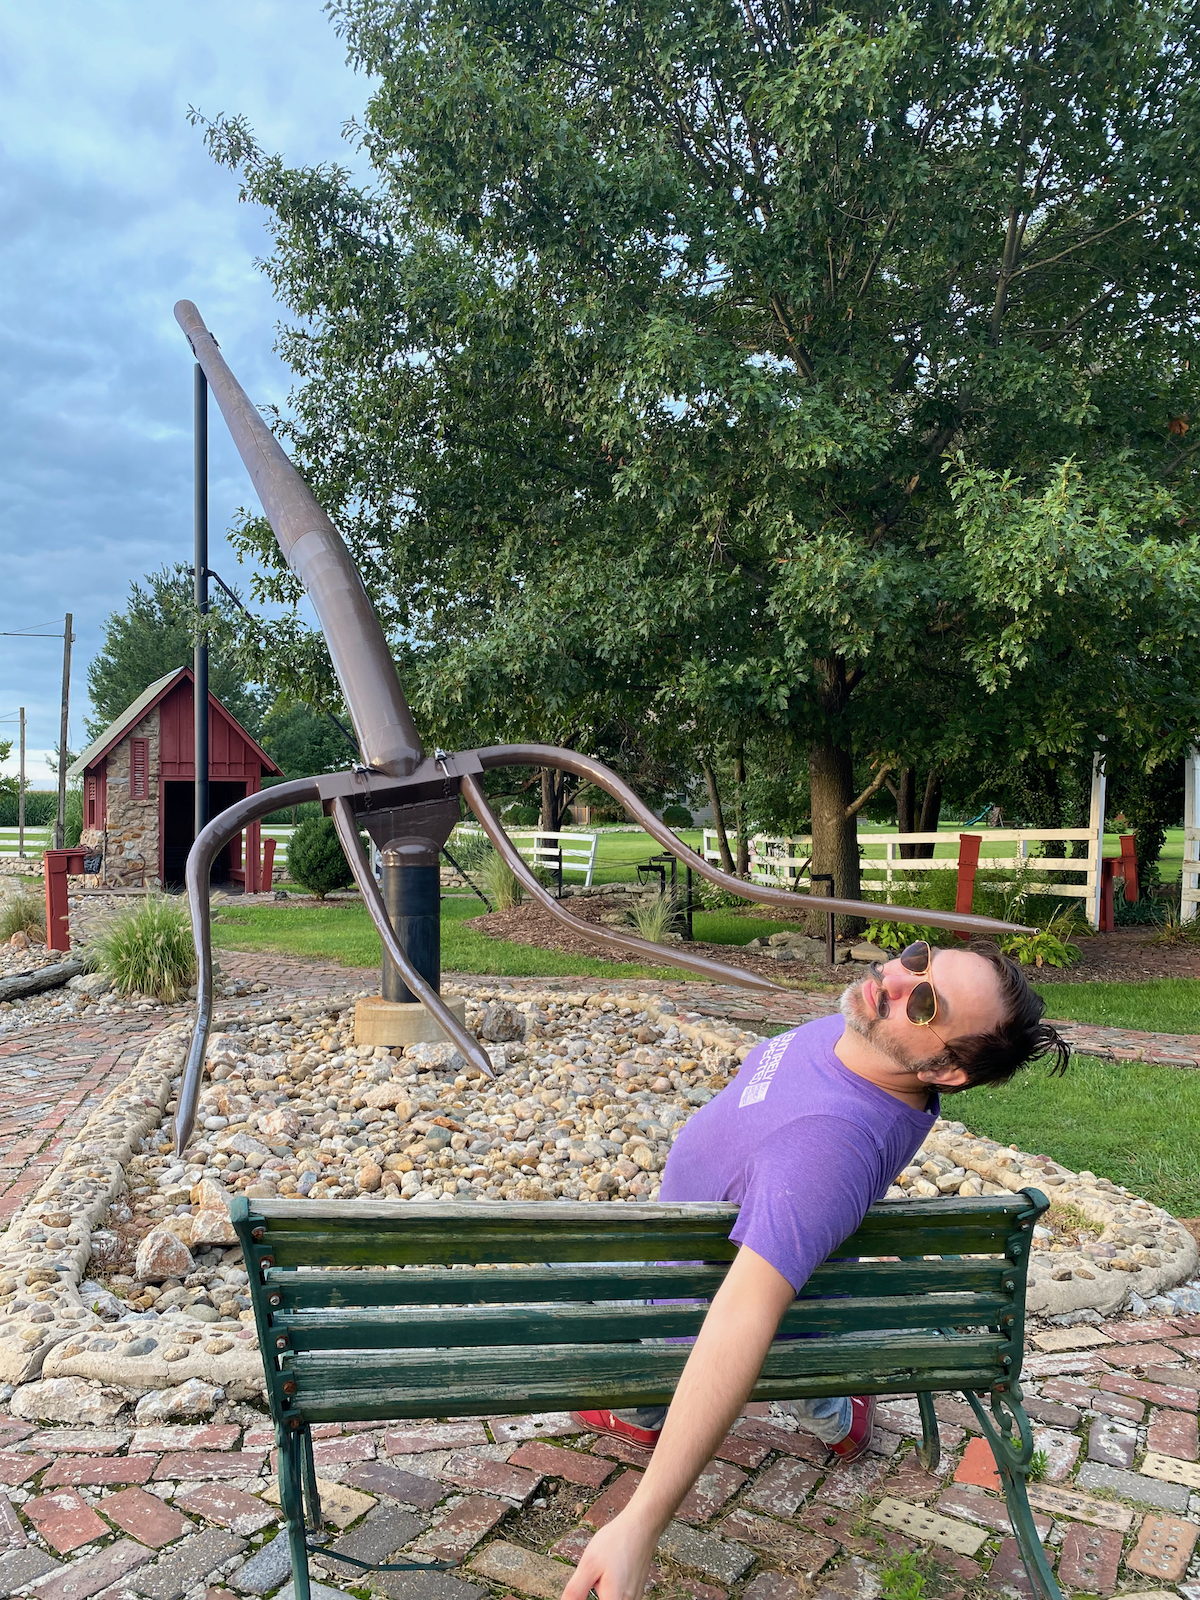 Man pretending to be stabbed by World's Largest Pitchfork in Casey, Illinois